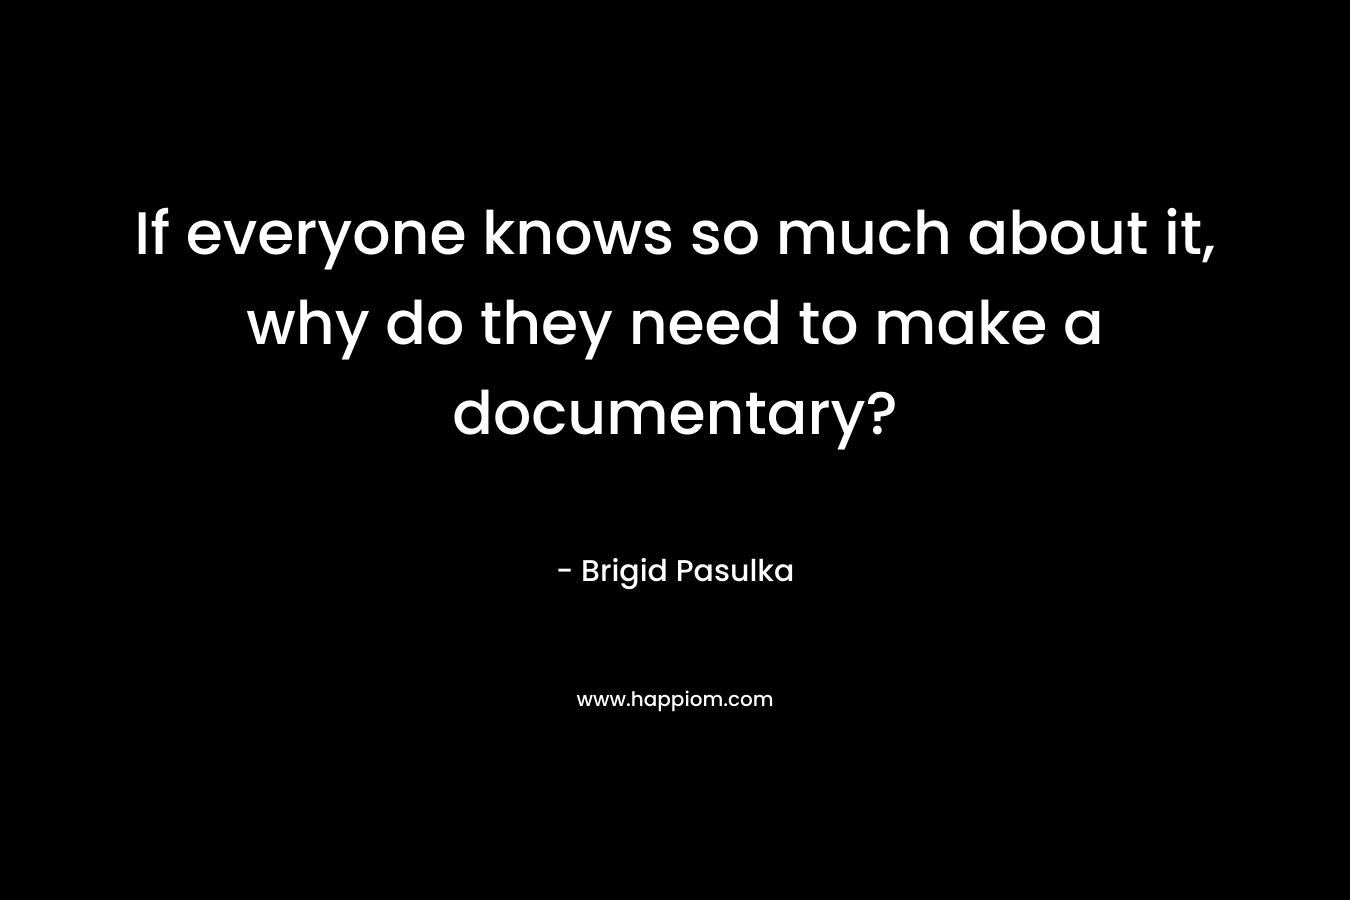 If everyone knows so much about it, why do they need to make a documentary?